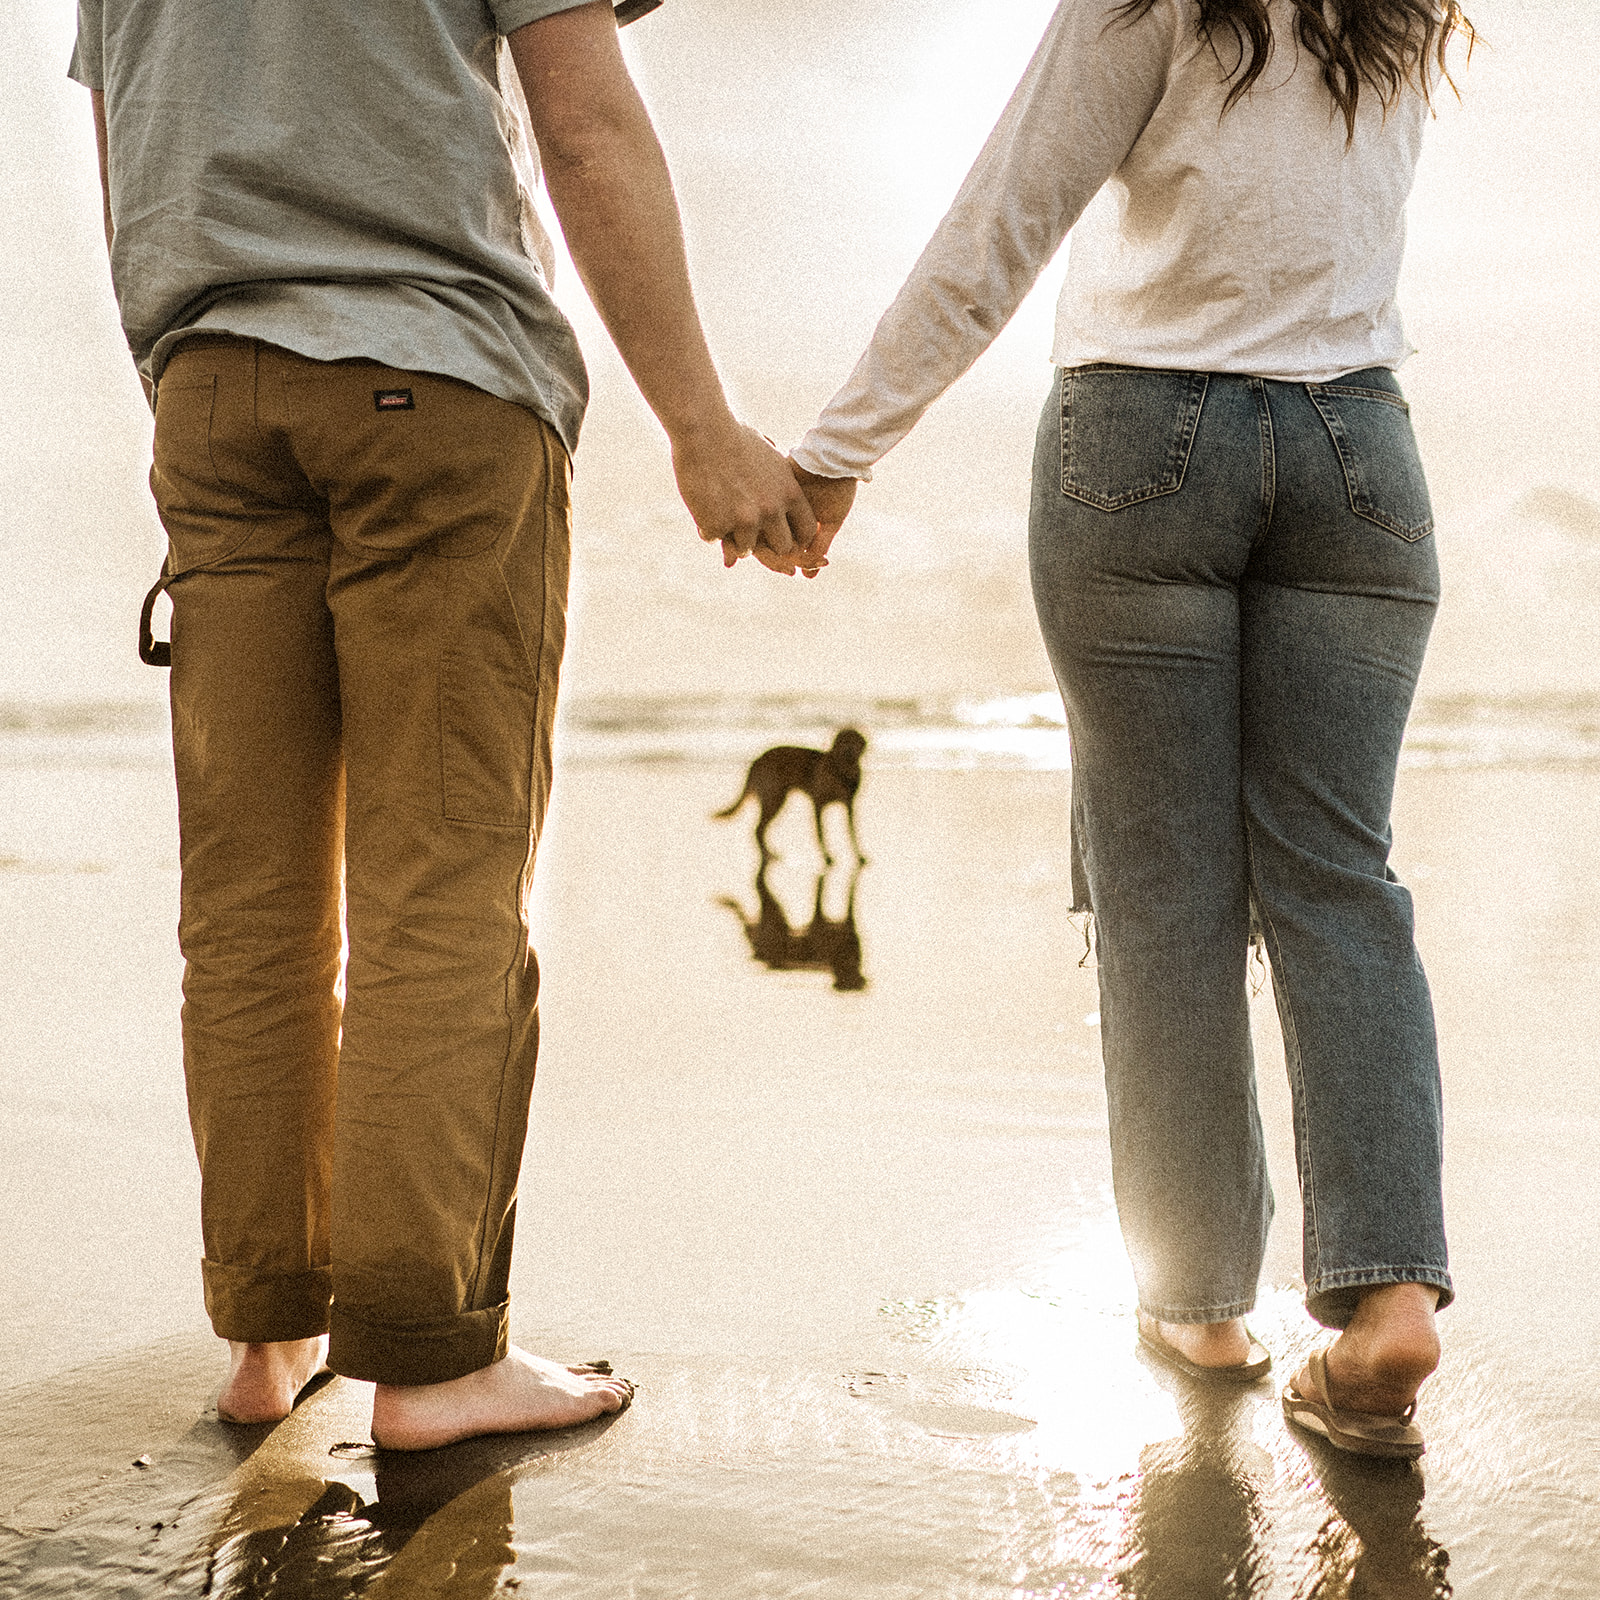 golden retriever stands in the distance at the beach while engaged couple holds hands